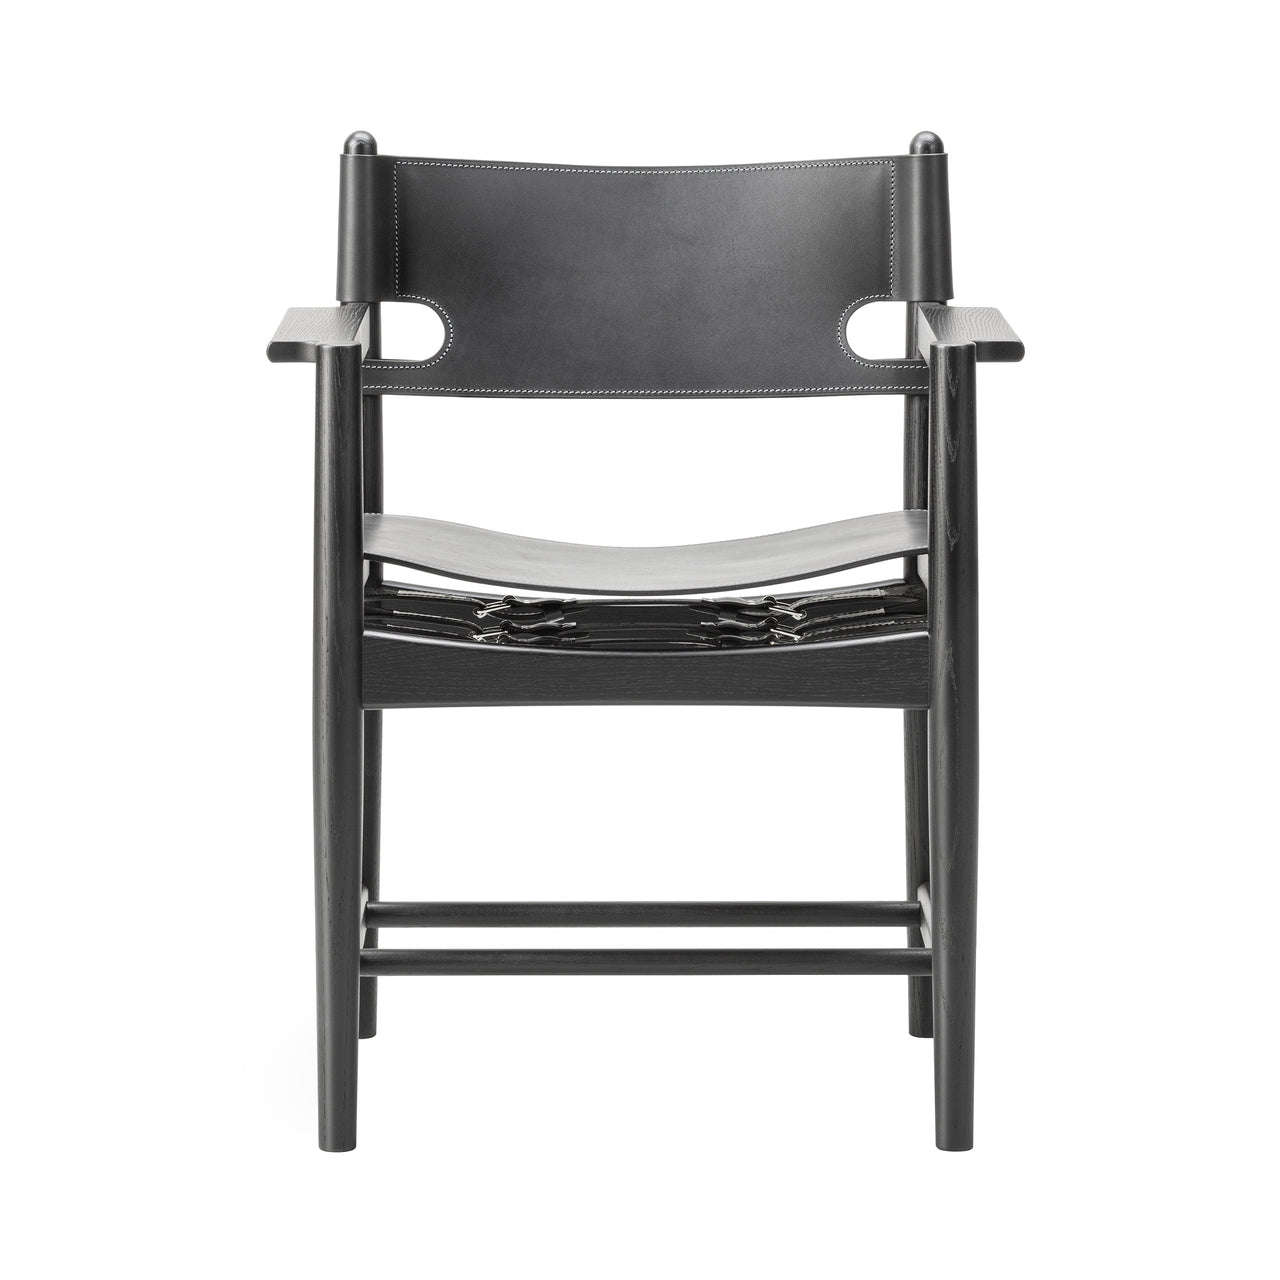 The Spanish Dining Chair: With Arm + Black Lacquered Oak + Black